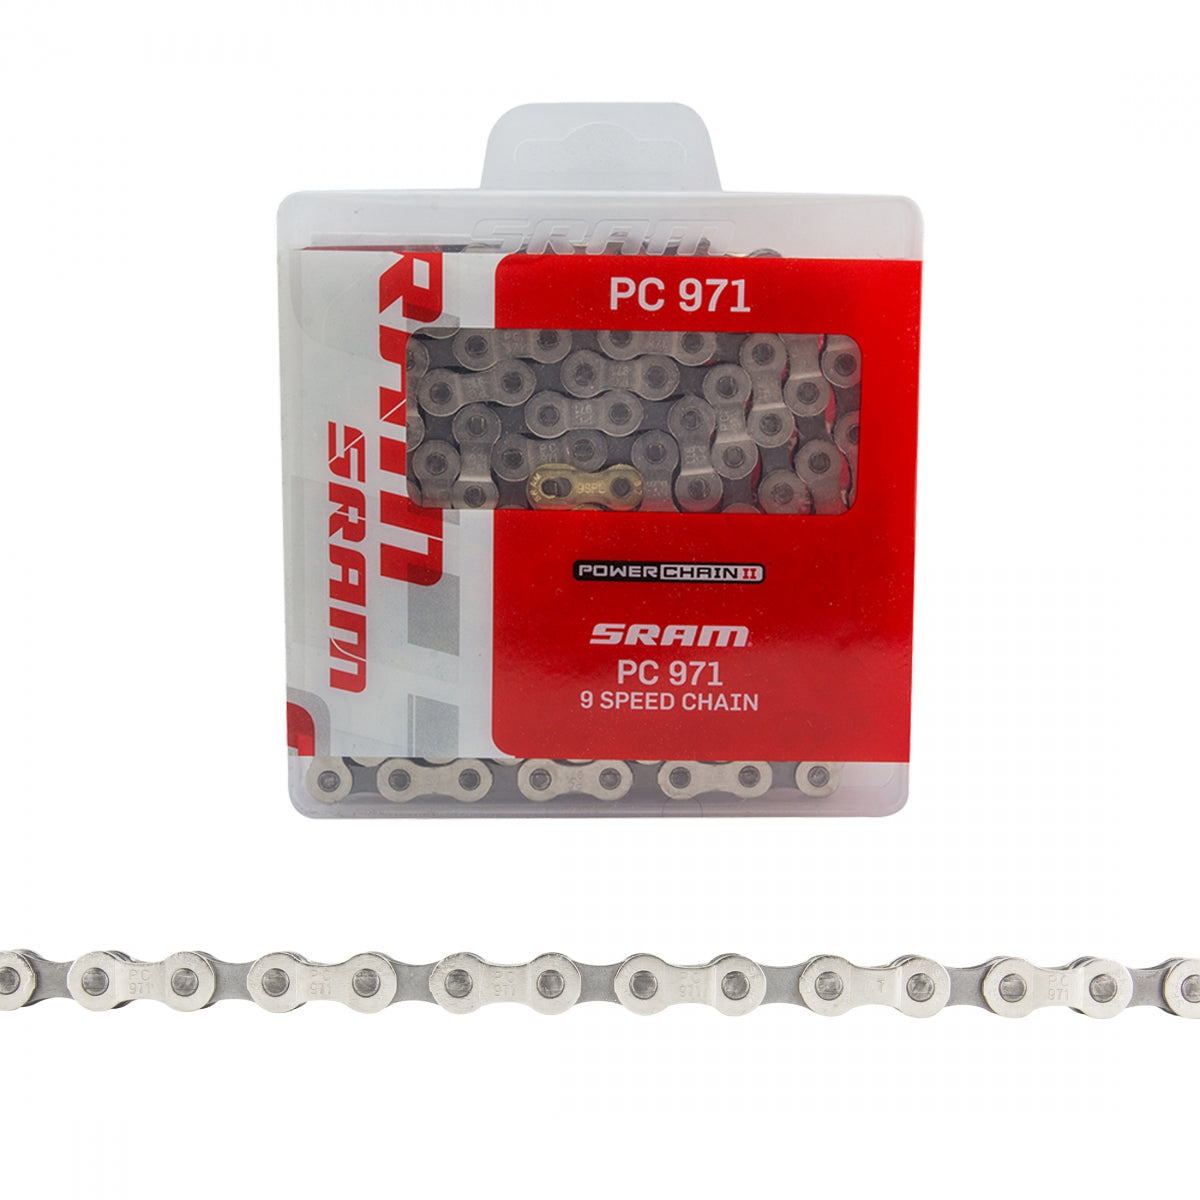 SRAM PC 971 Chain with Power Link, 9-Speed, 114-Link, Silver/Grey